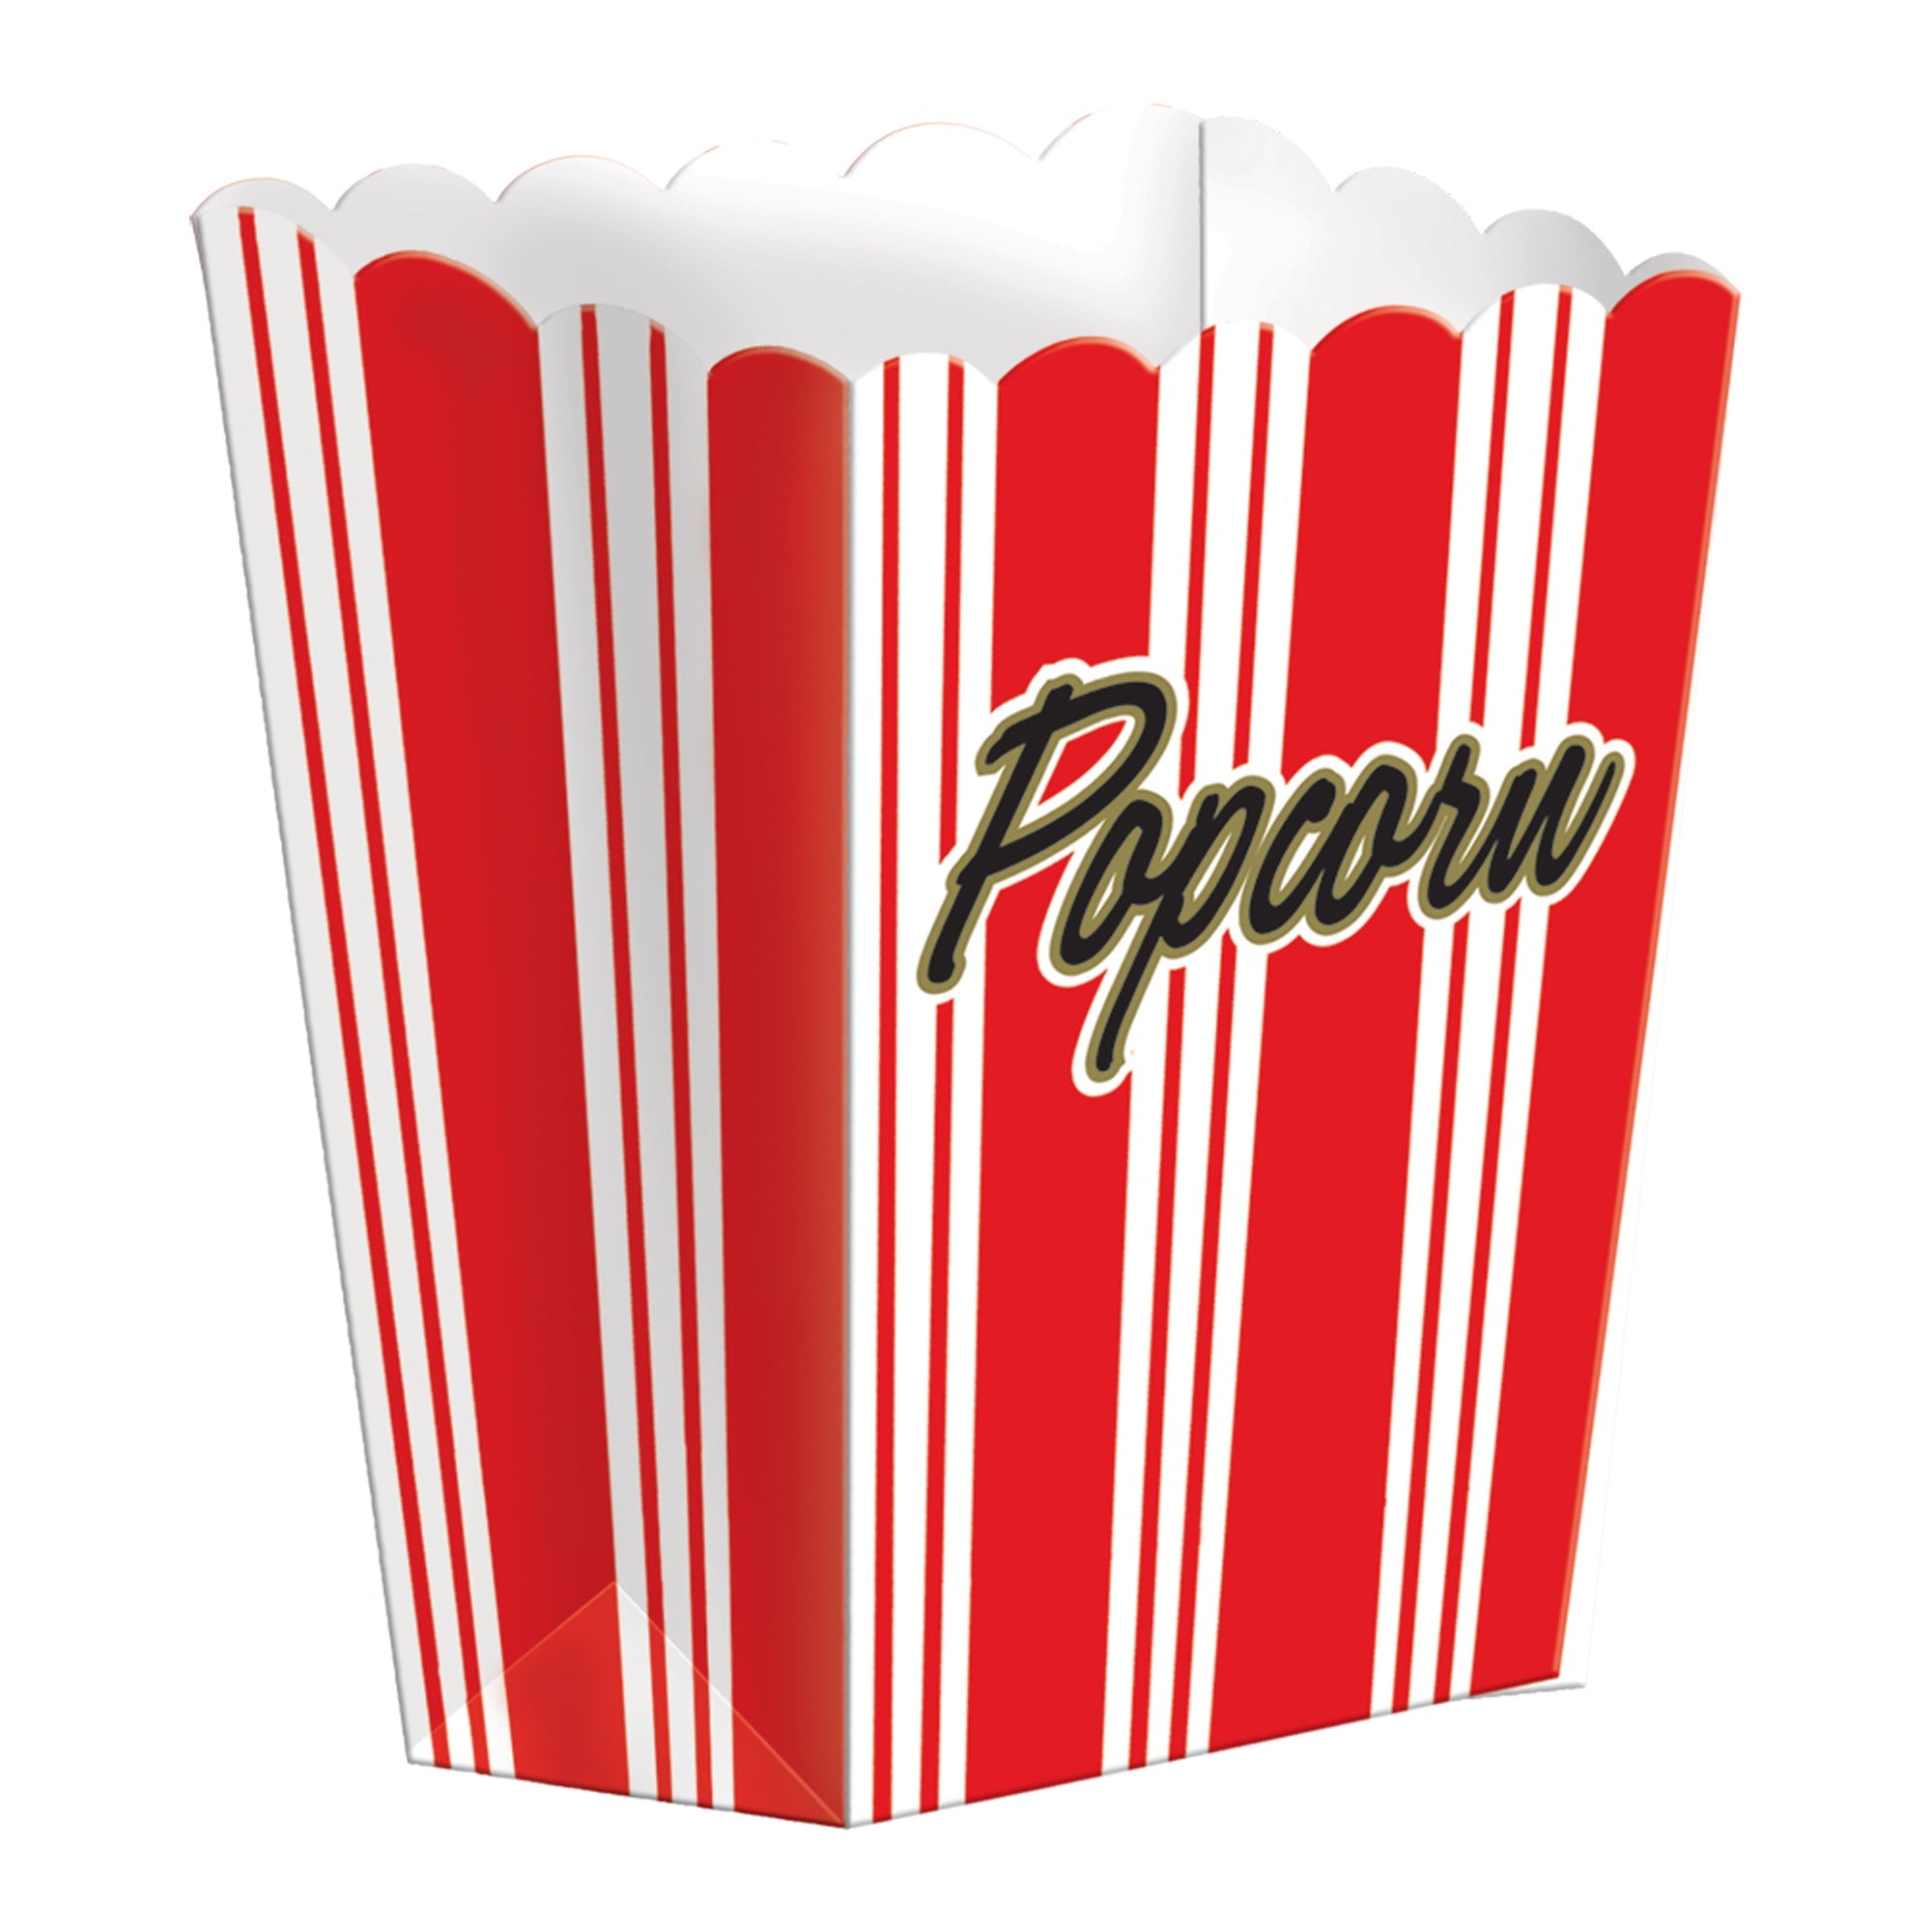 Small Popcorn Boxes  5 1/4" x 3 3/4" x 1 1/2" package of 8